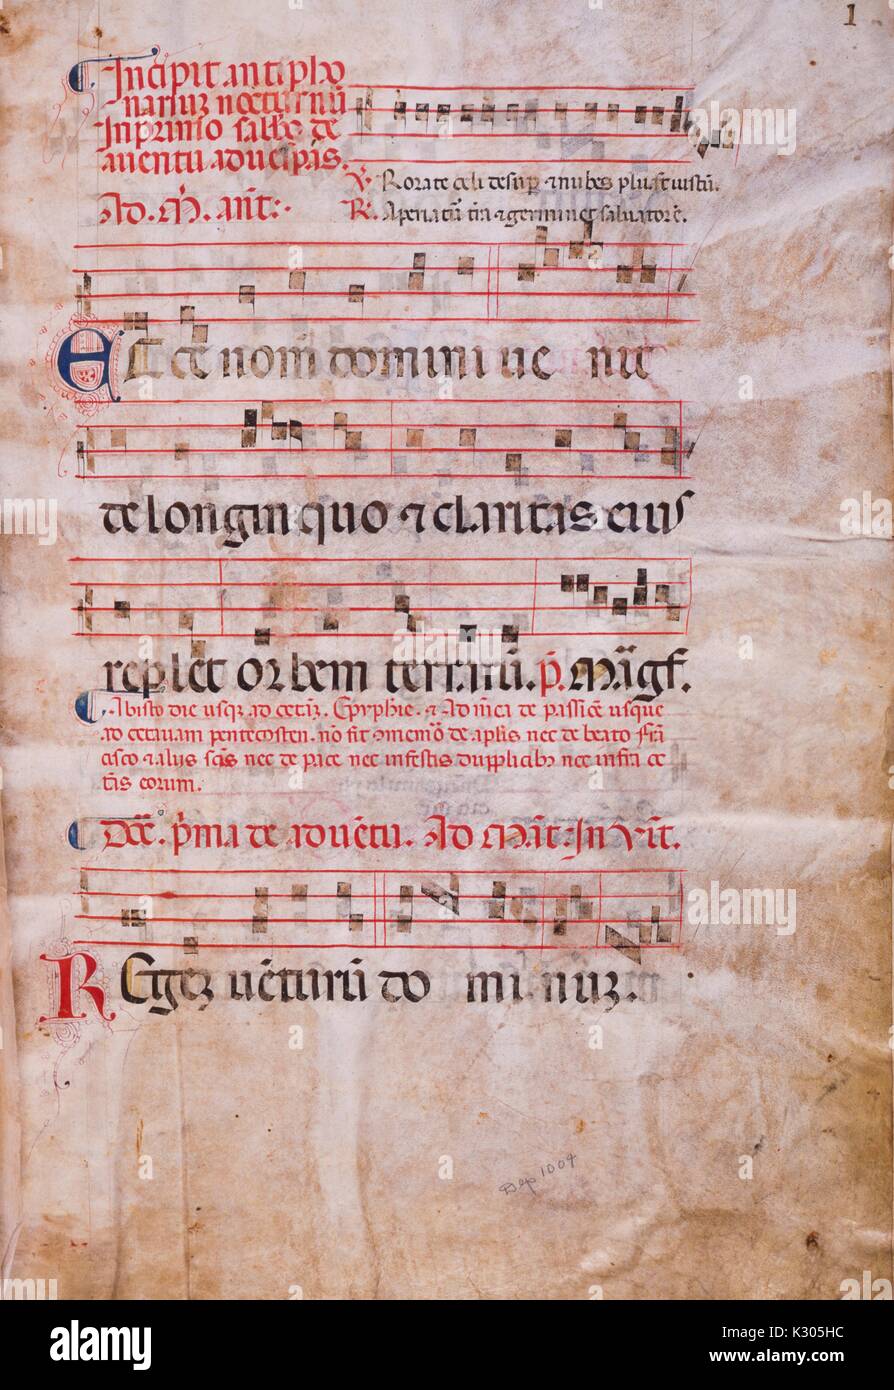 Illuminated manuscript page of music, from the 'Incipit antiphonarium nocturnum, ' a 15th century Latin antiphonary from the Catholic Church, 2013. Stock Photo